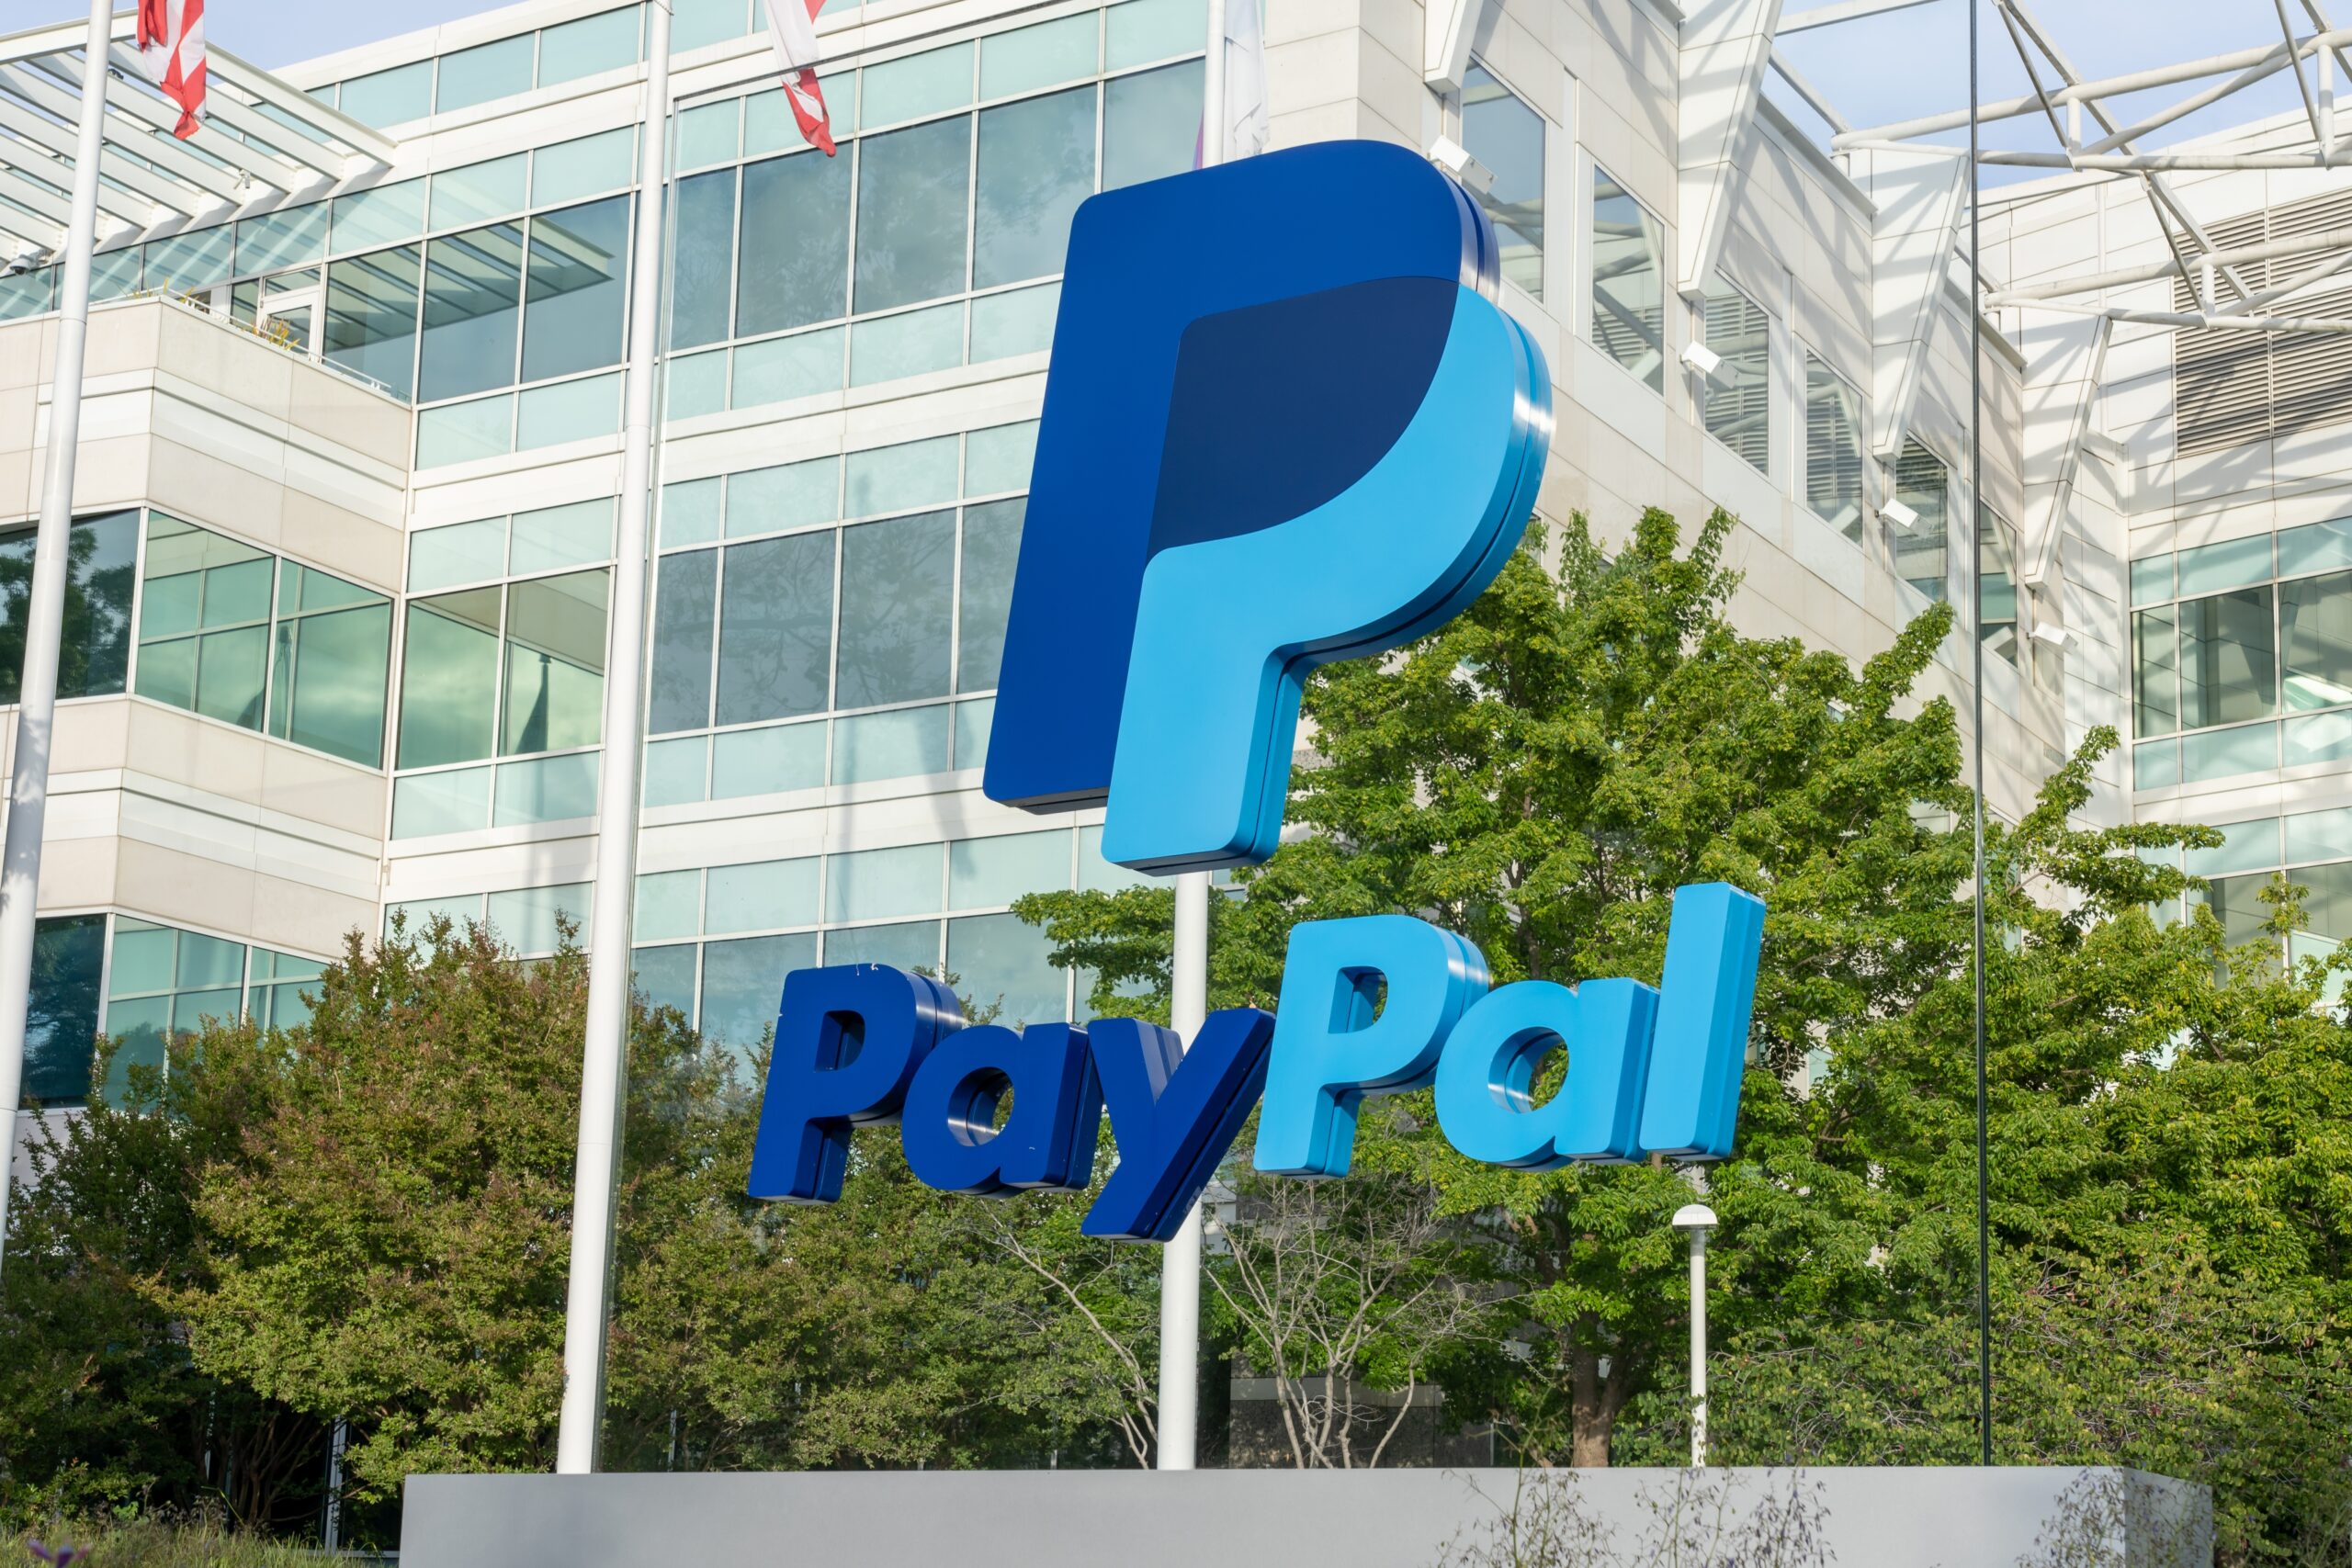 paypal-to-lay-off-more-than-2,500-employees-to-make-way-for-'automation'